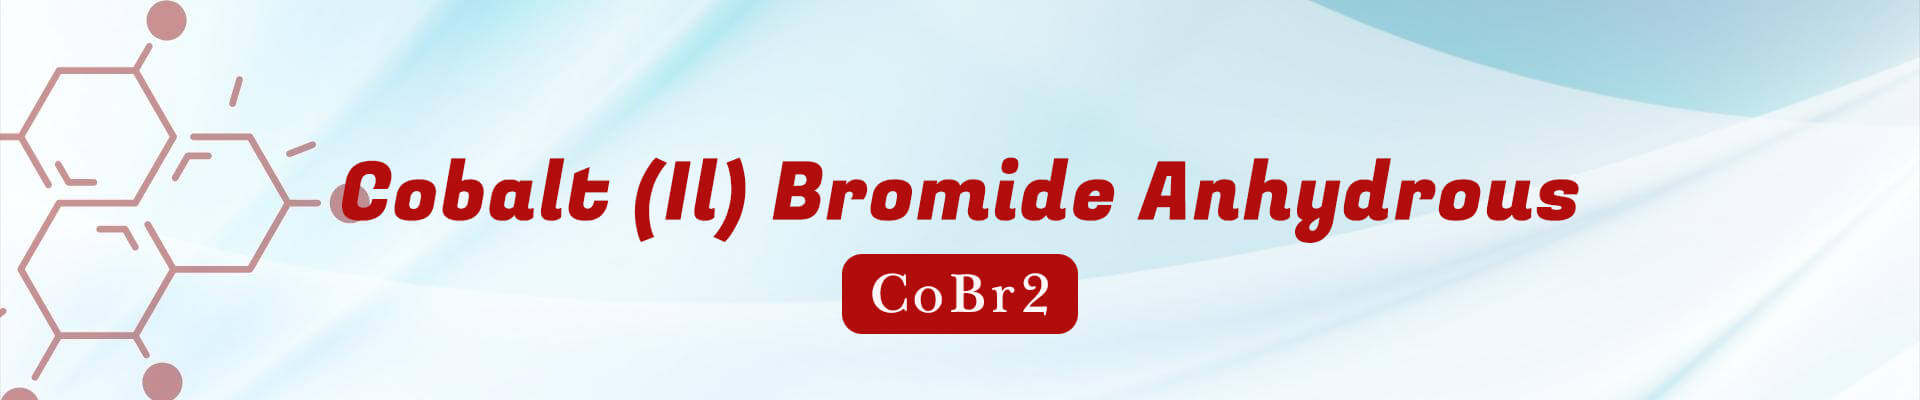 Cobalt (Il) Bromide Anhydrous